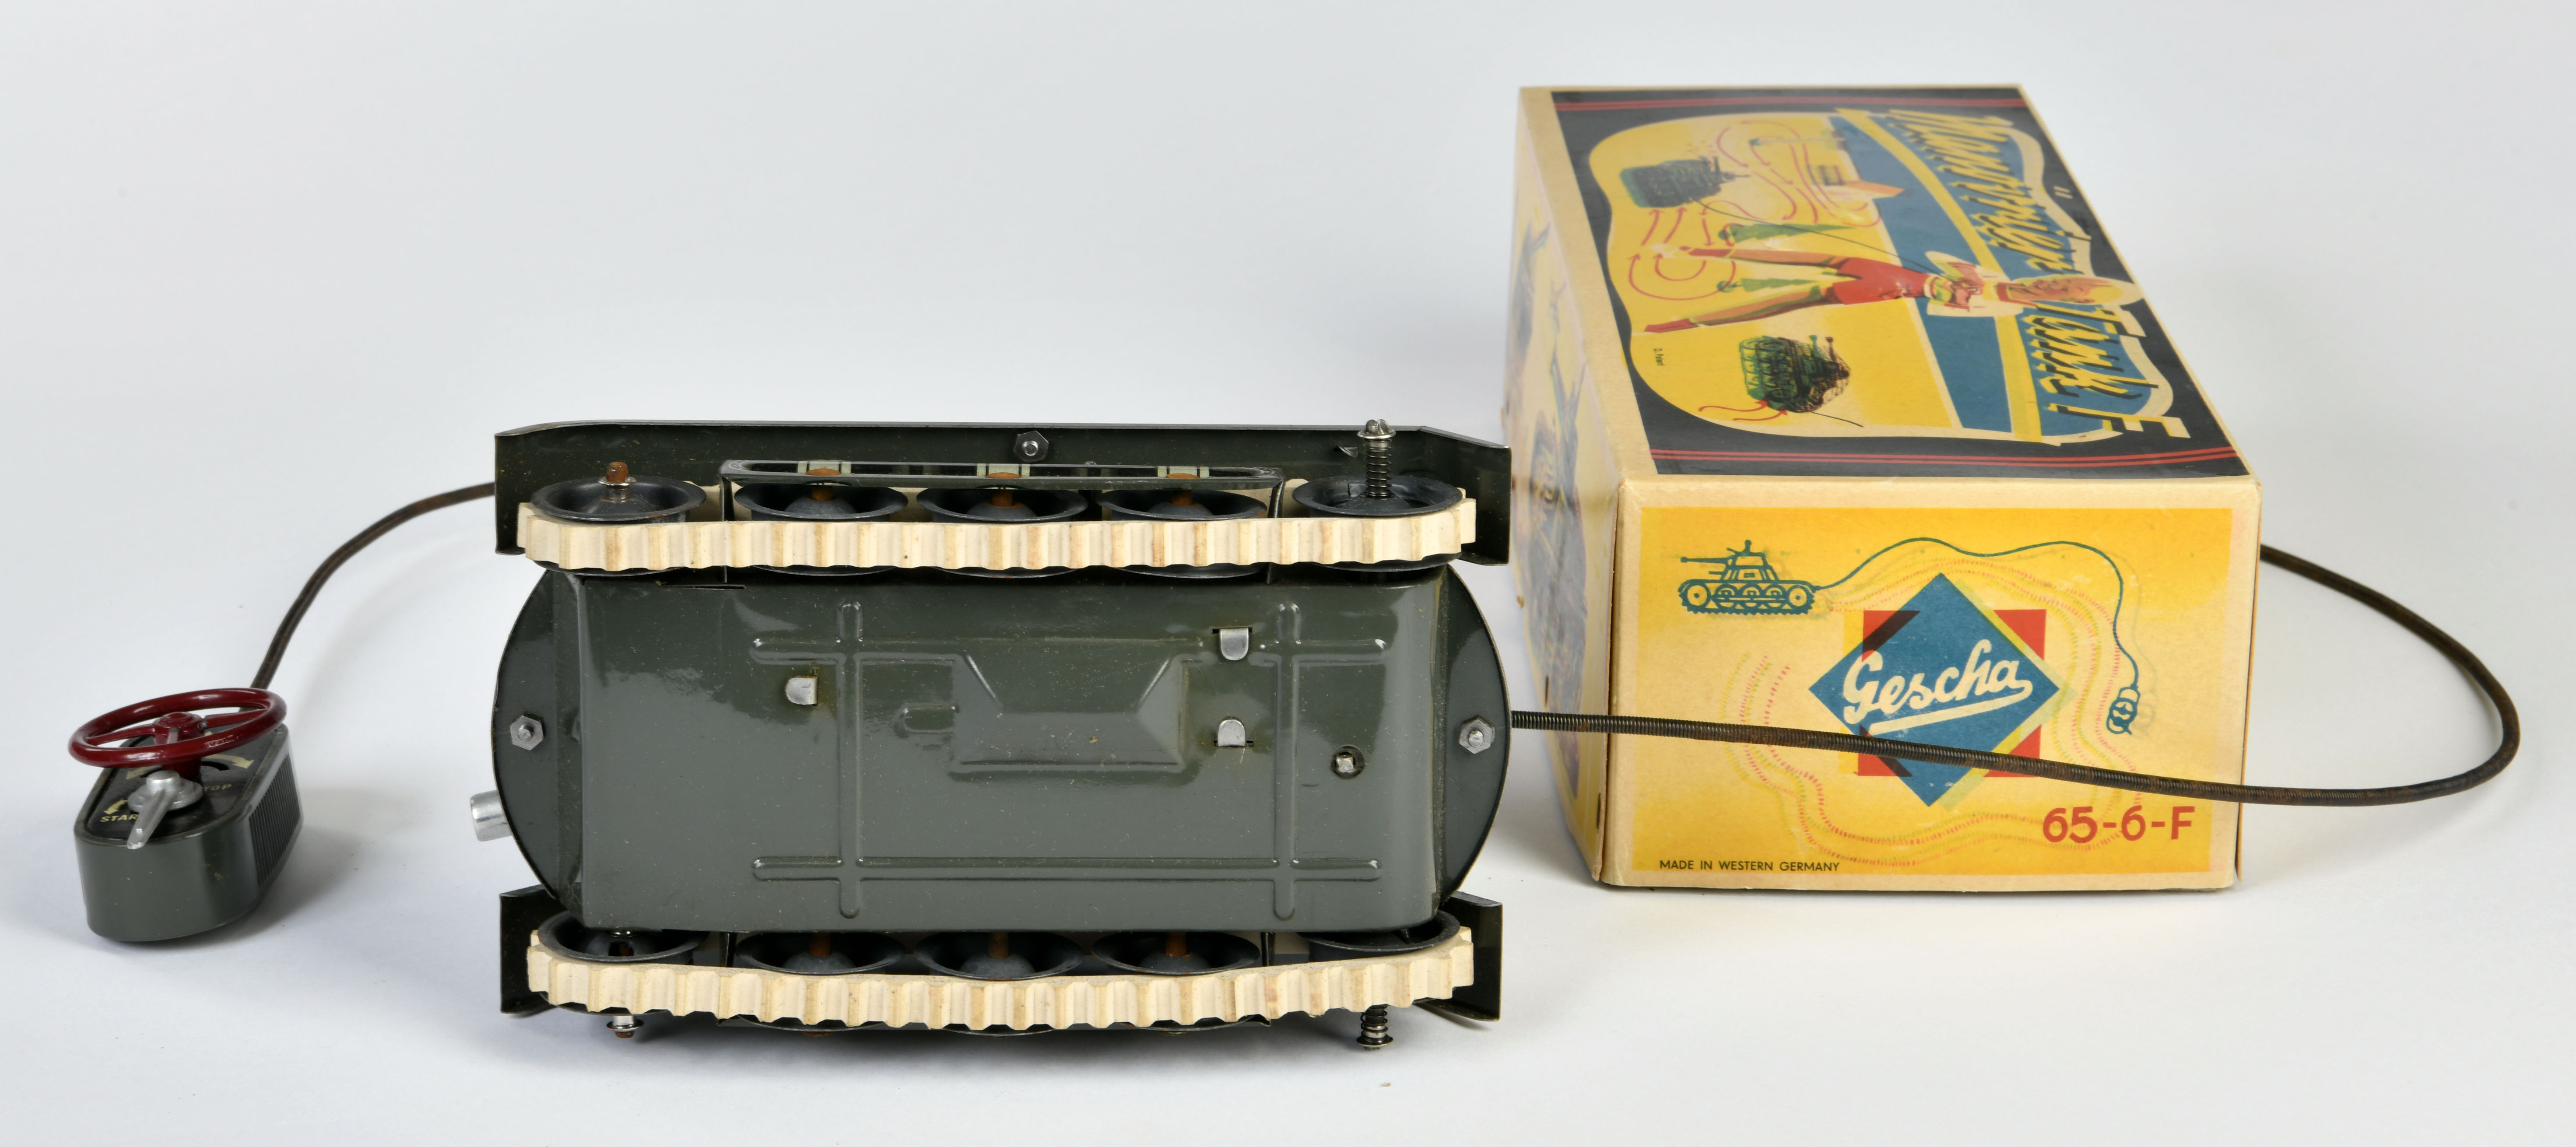 Gescha, Manoeuvre Tank with remote control, W.-Germany, 20 cm, tin, function ok, box C 1, C 1- - Image 3 of 4